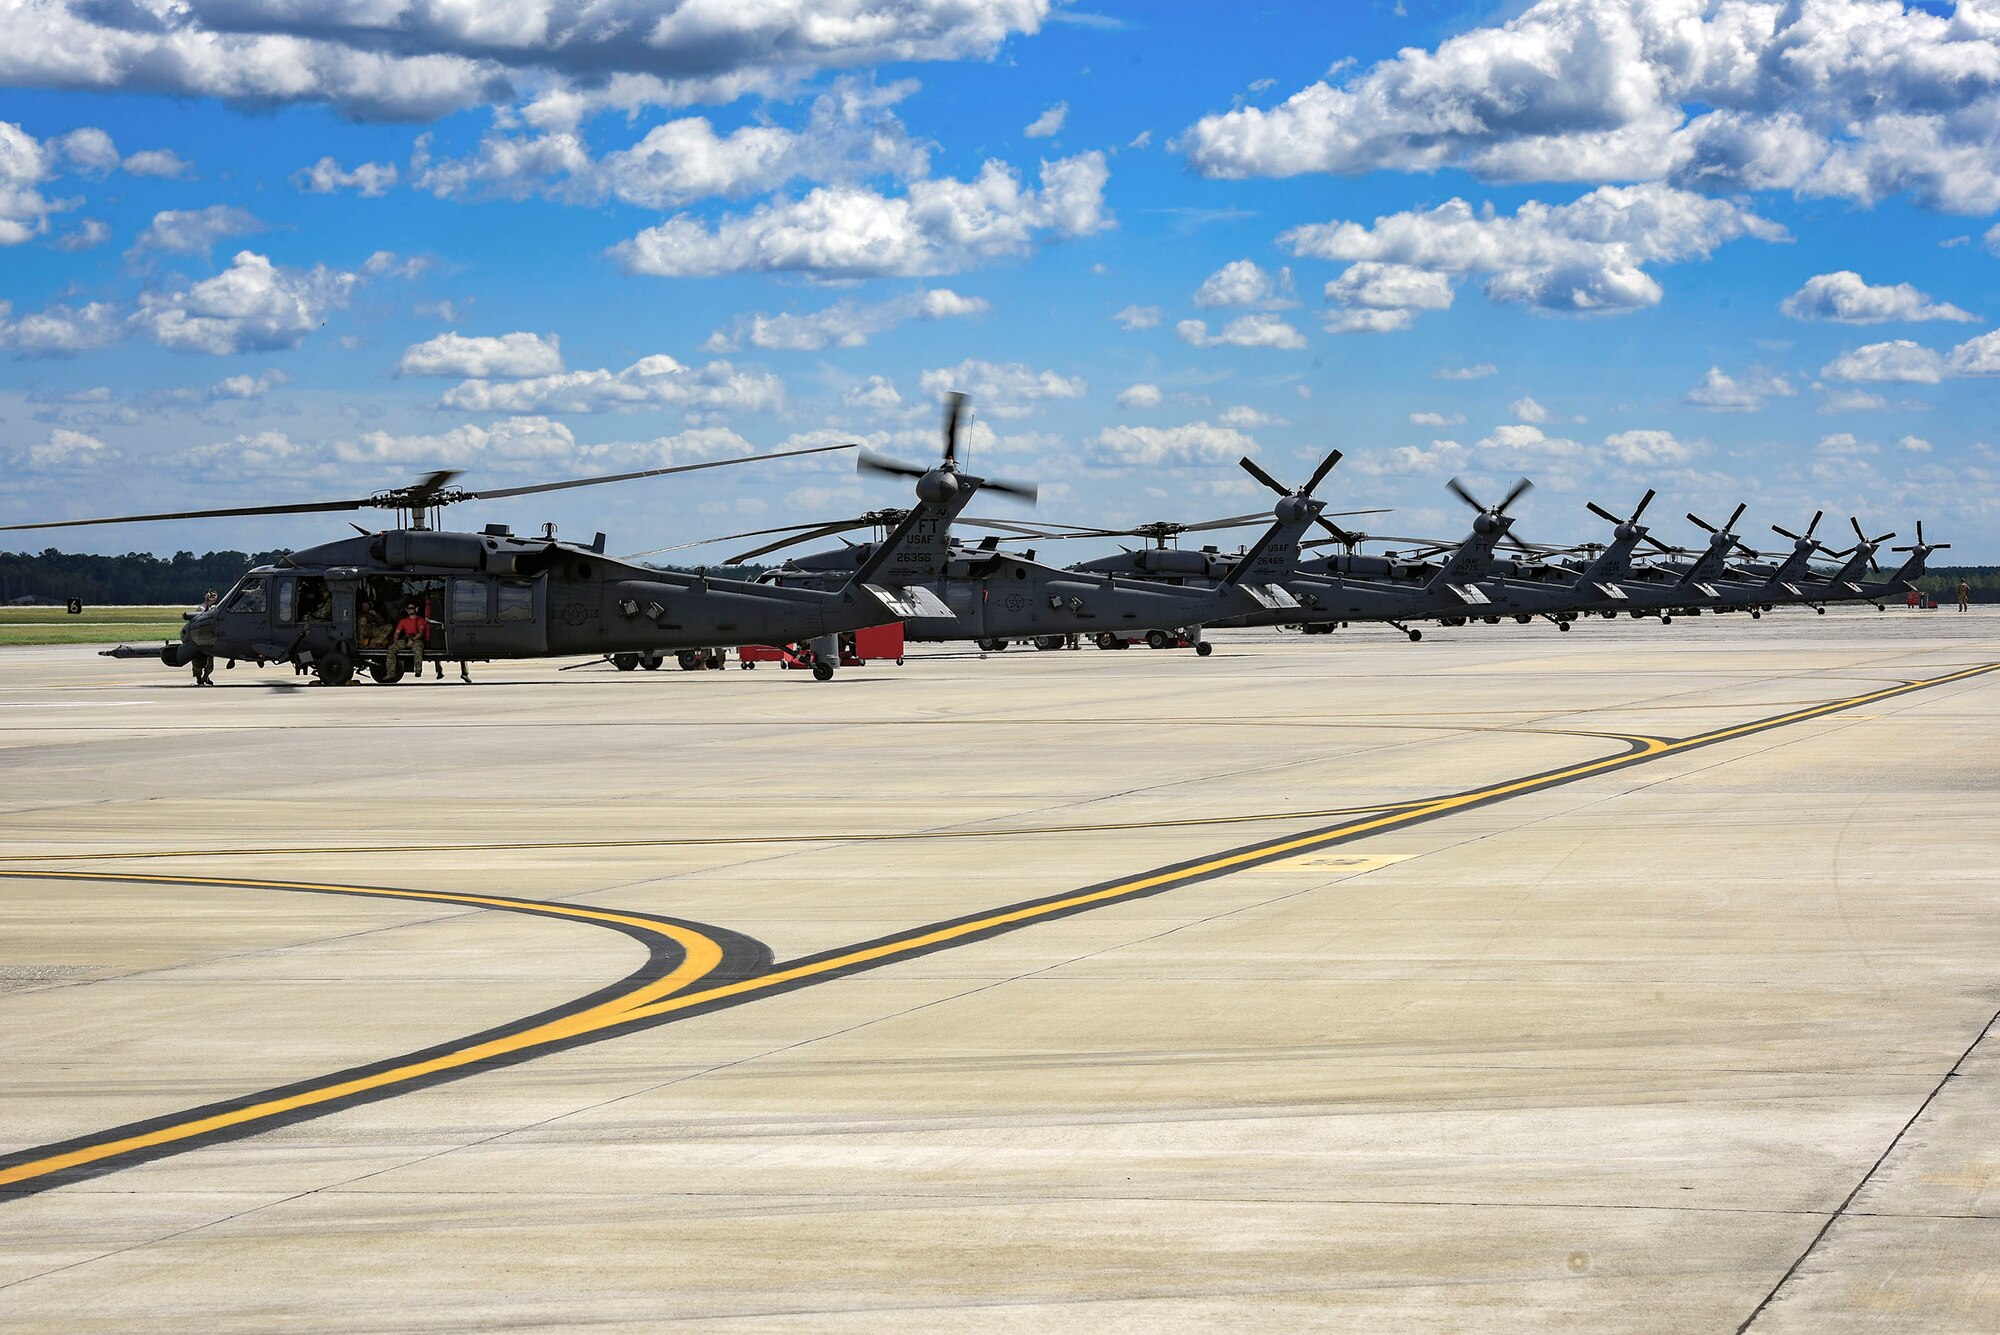 HH-60G Pavehawk helicopters position for departure in support Tropical Storm Florence relief operations, Sept. 15, 2018, at Moody Air Force Base, Ga. The 334th Air Expeditionary Group launched HC-130J Combat King IIs, HH-60G Pavehawks, aircrew and support personnel to pre-position at Joint Base Charleston, S.C., for potential Tropical Storm Florence response. Under the command of Col. John Creel, the 374th Rescue Group commander, the AEG integrated to make one expeditionary search and rescue unit comprised of rescue and support personnel from both the 23d Wing, 920th Rescue Wing at Patrick Air Force Base, Fla., and 51st Combat Communications Squadron at Robins Air Force Base, Ga. (U.S. Air Force photo by Senior Airman Greg Nash)